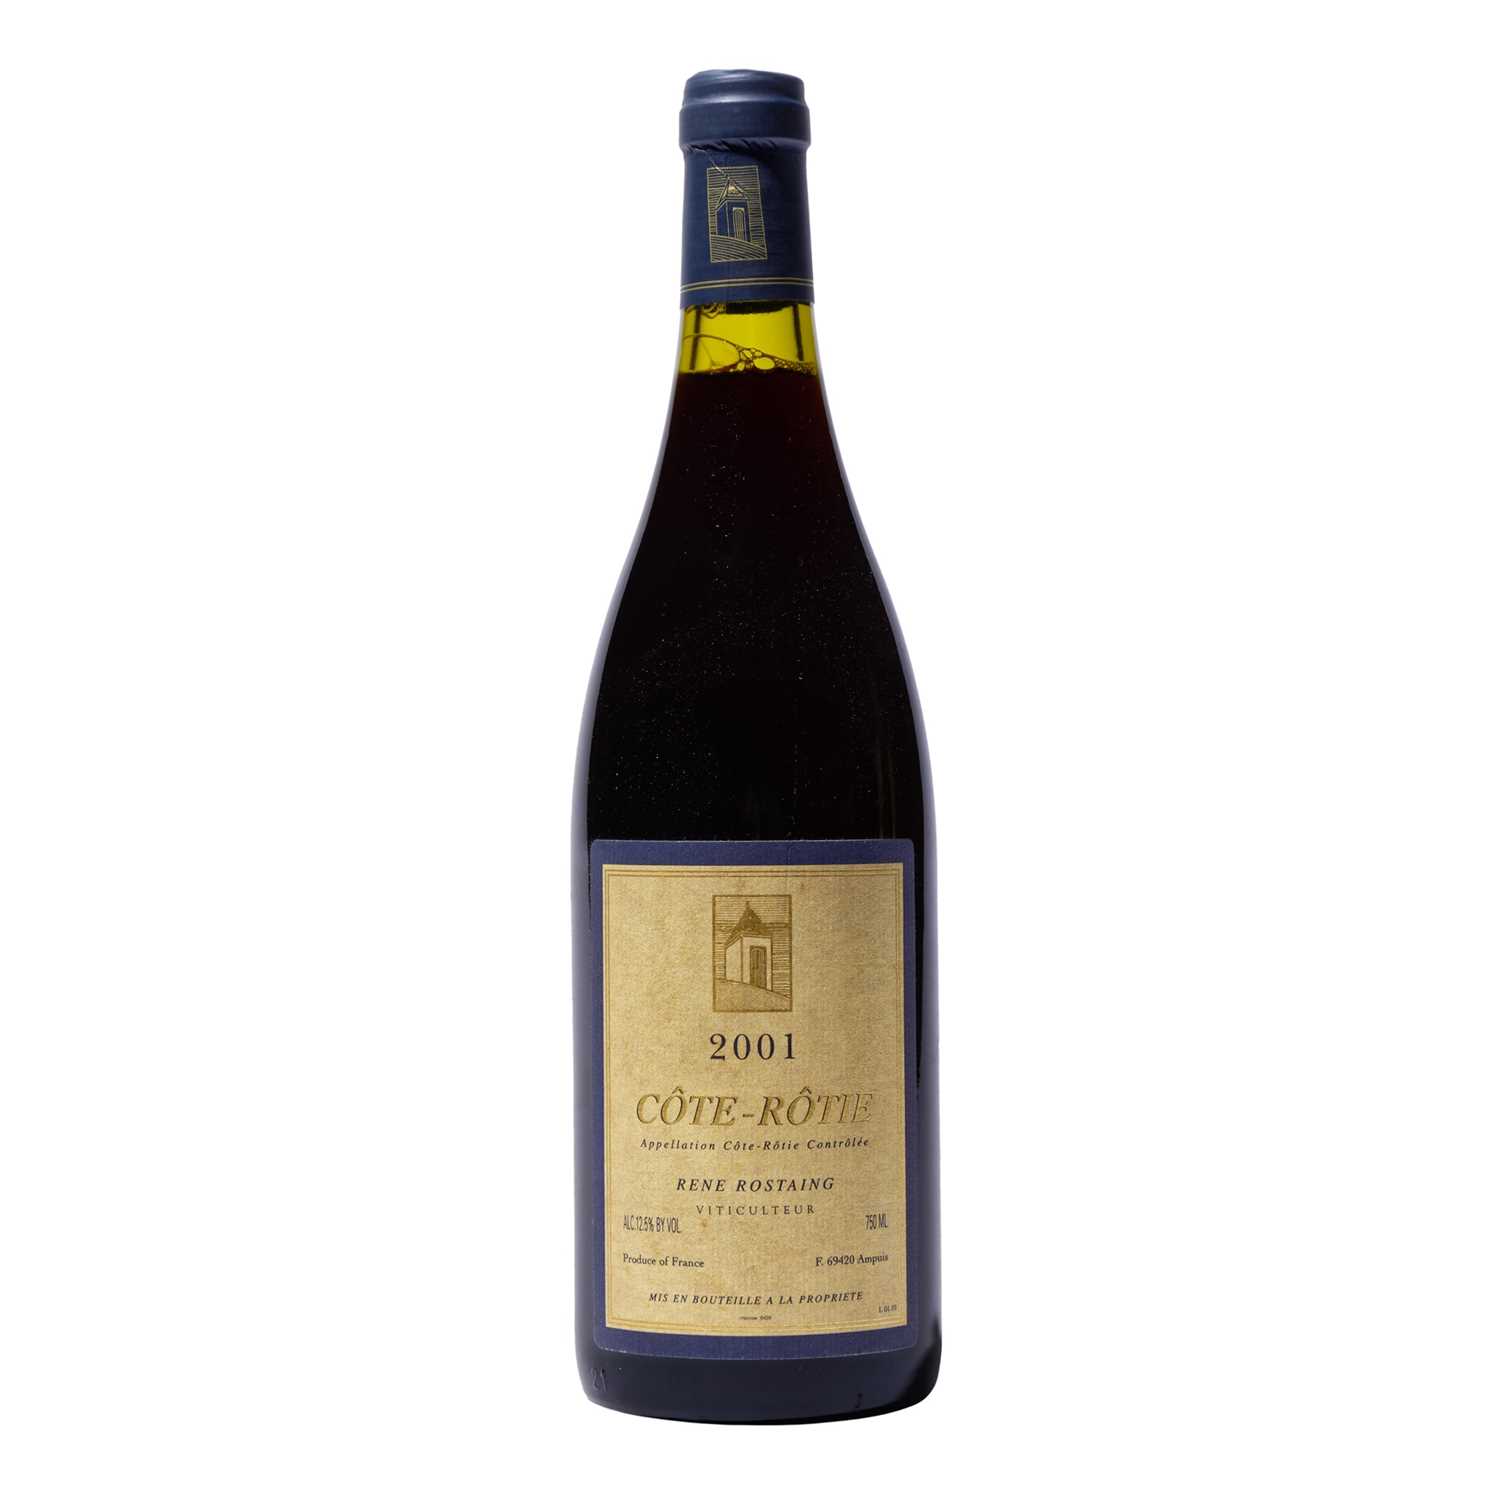 Lot 123 - 6 bottles 2001 Cote-Rotie R Rostaing